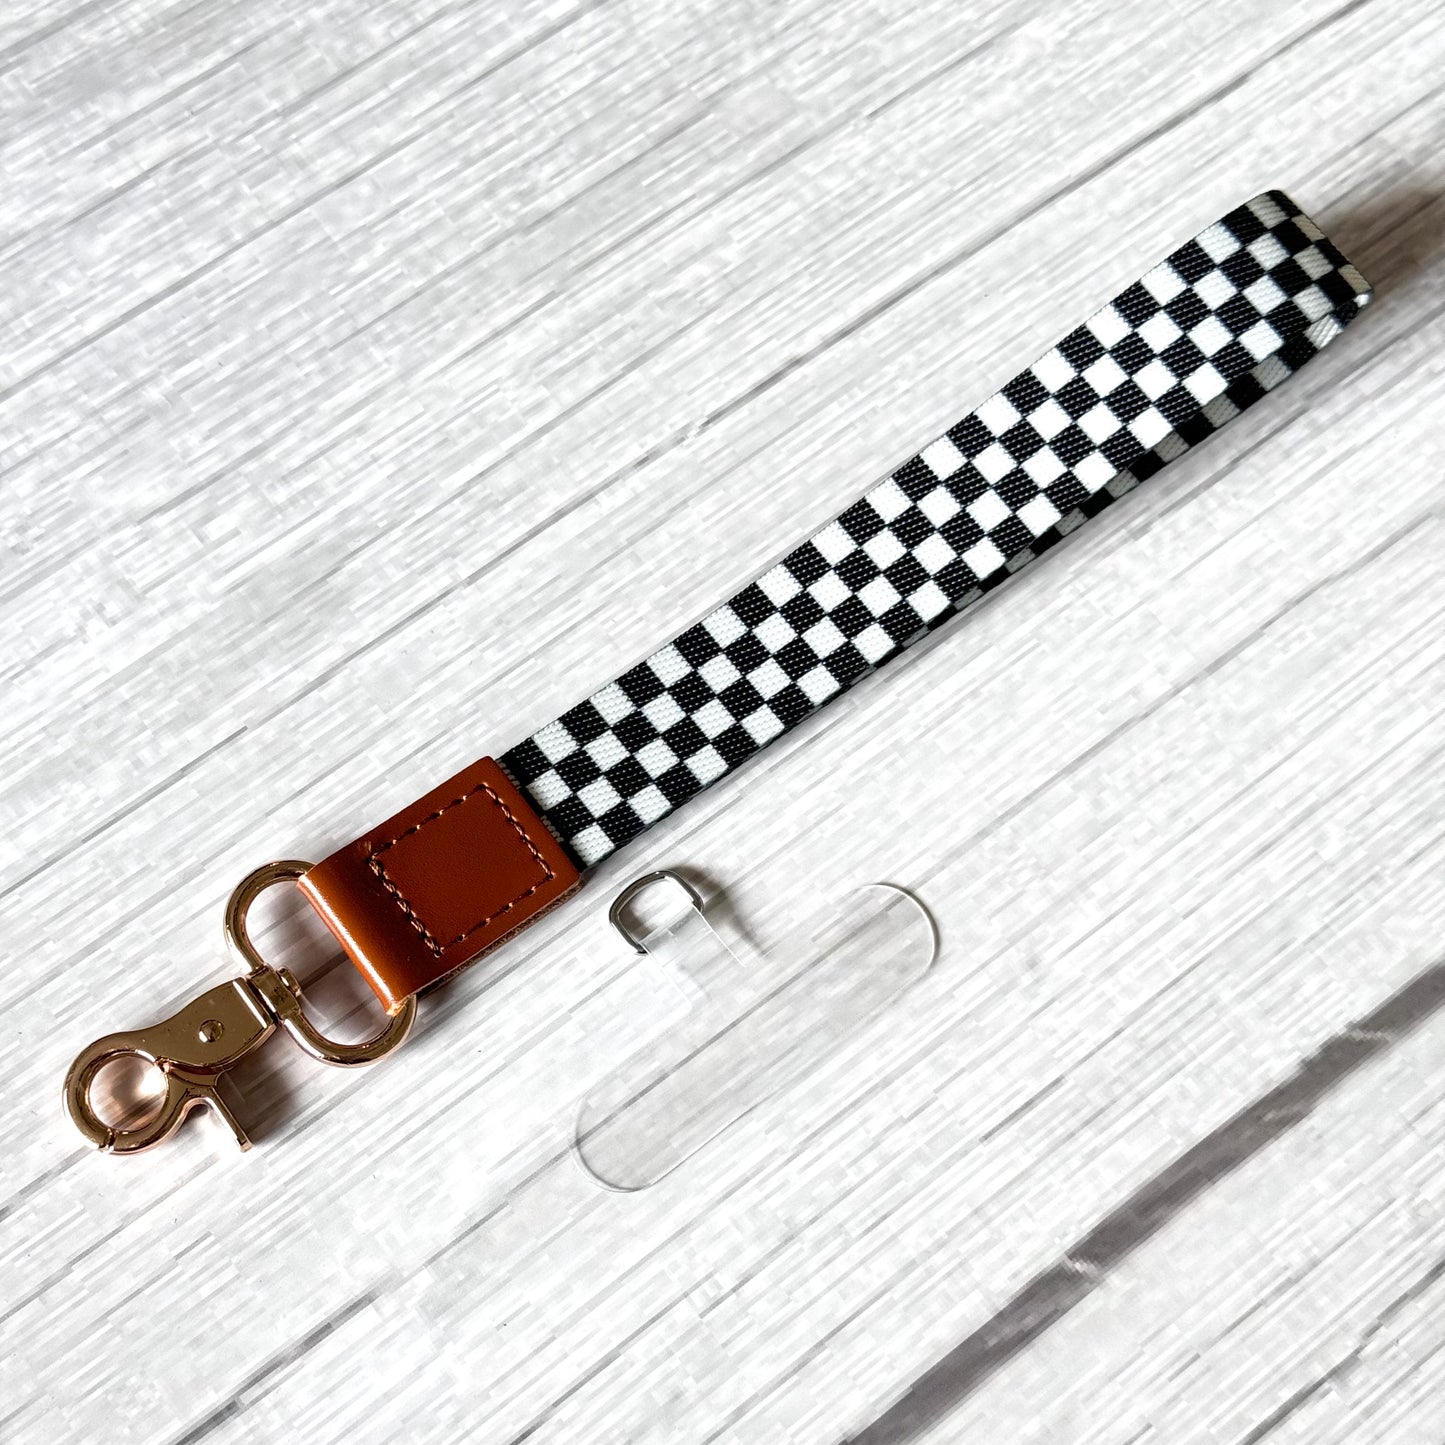 Phone Wrist Strap Keychain with Tether Tab - BLACK & WHITE CHECKERS